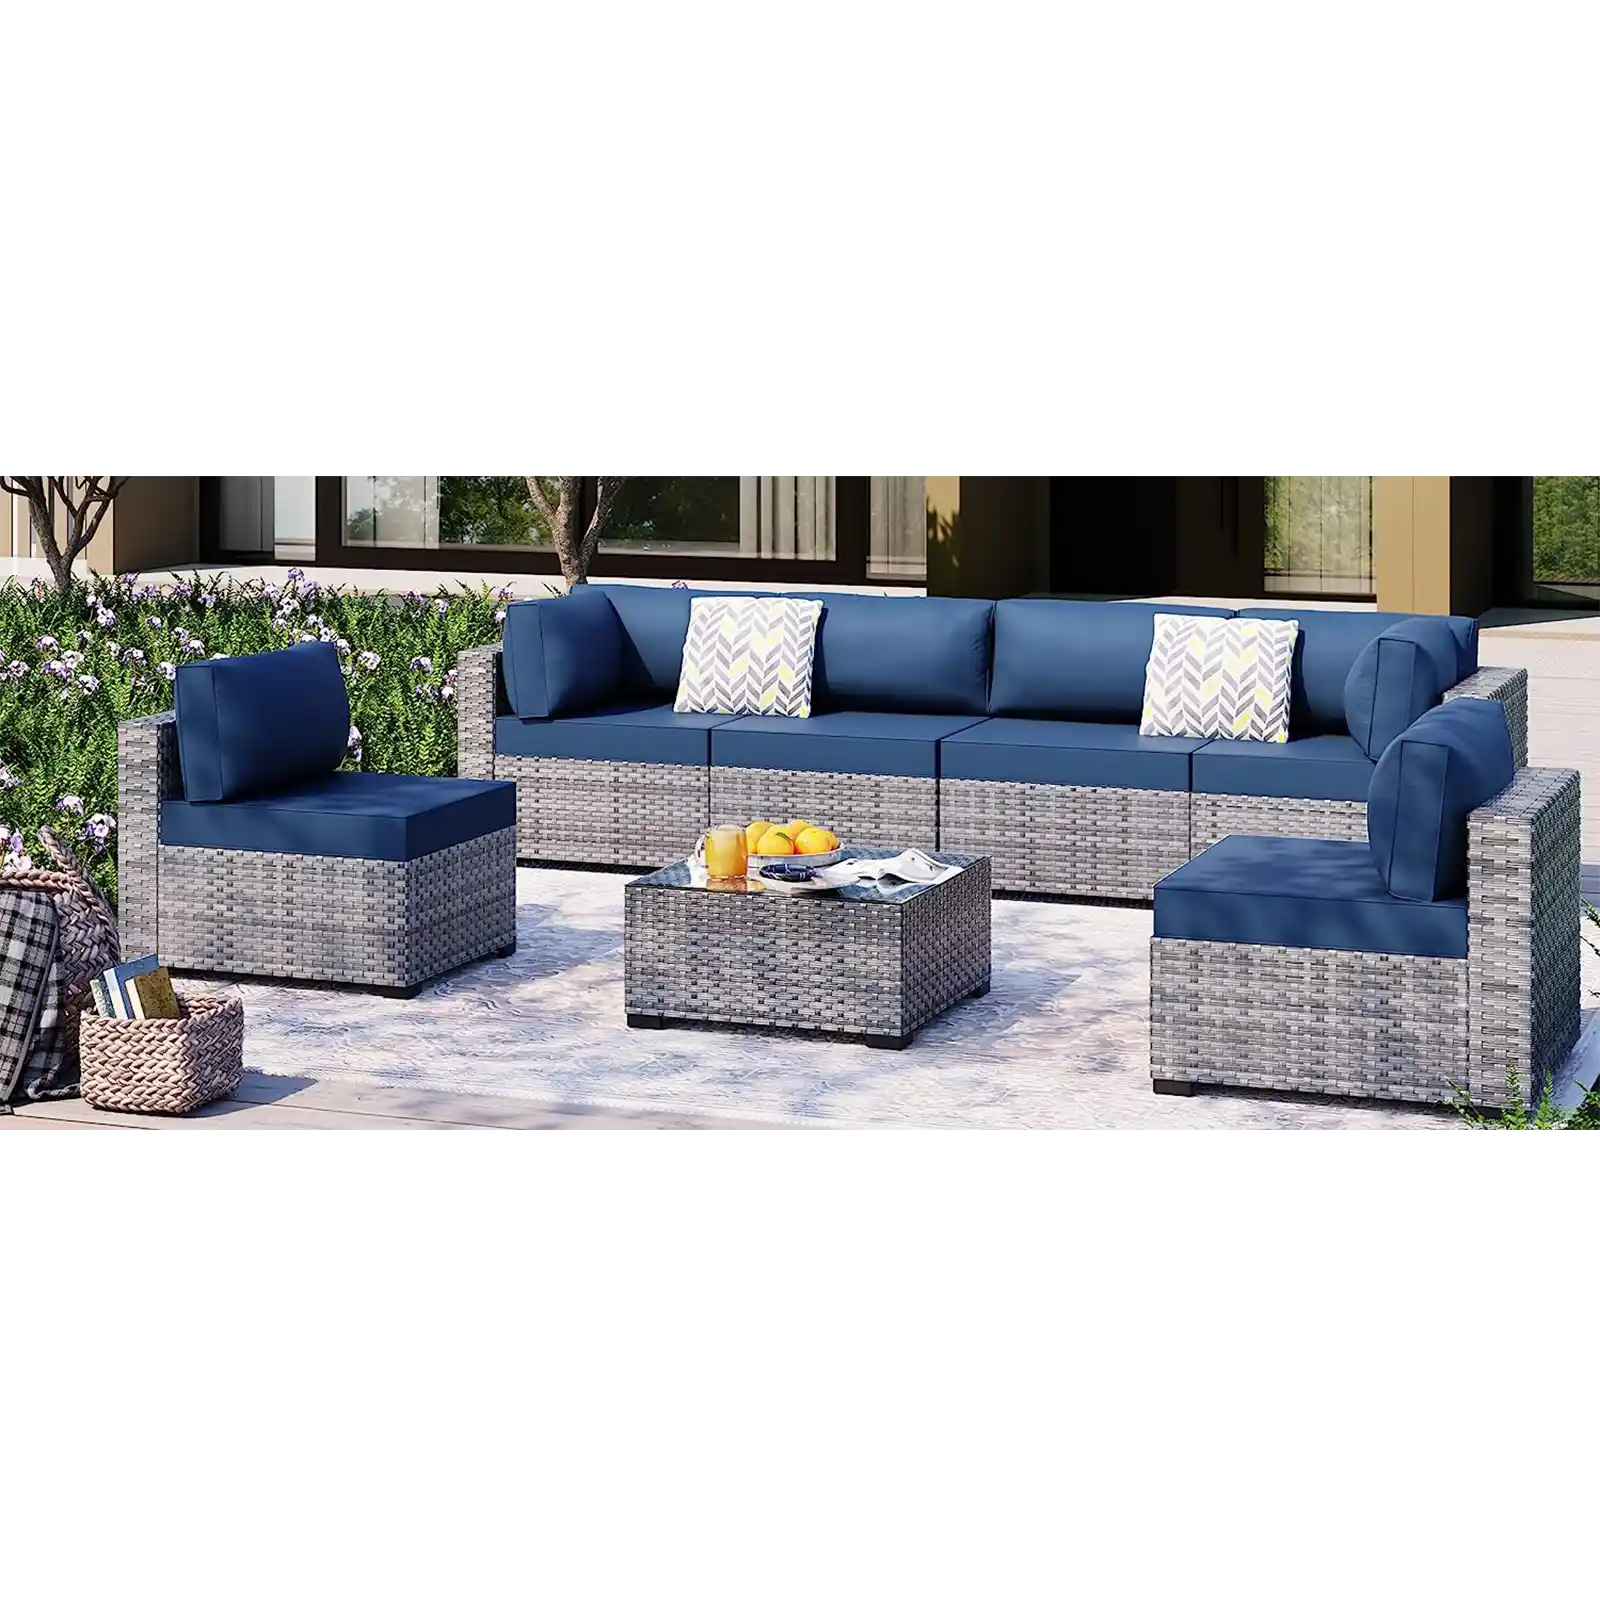 7pcs Patio Conversation Sets Outdoor Furniture Sets, High Back All-Weather Rattan Sectional Sofa with Tea Table&Washable Couch Cushions